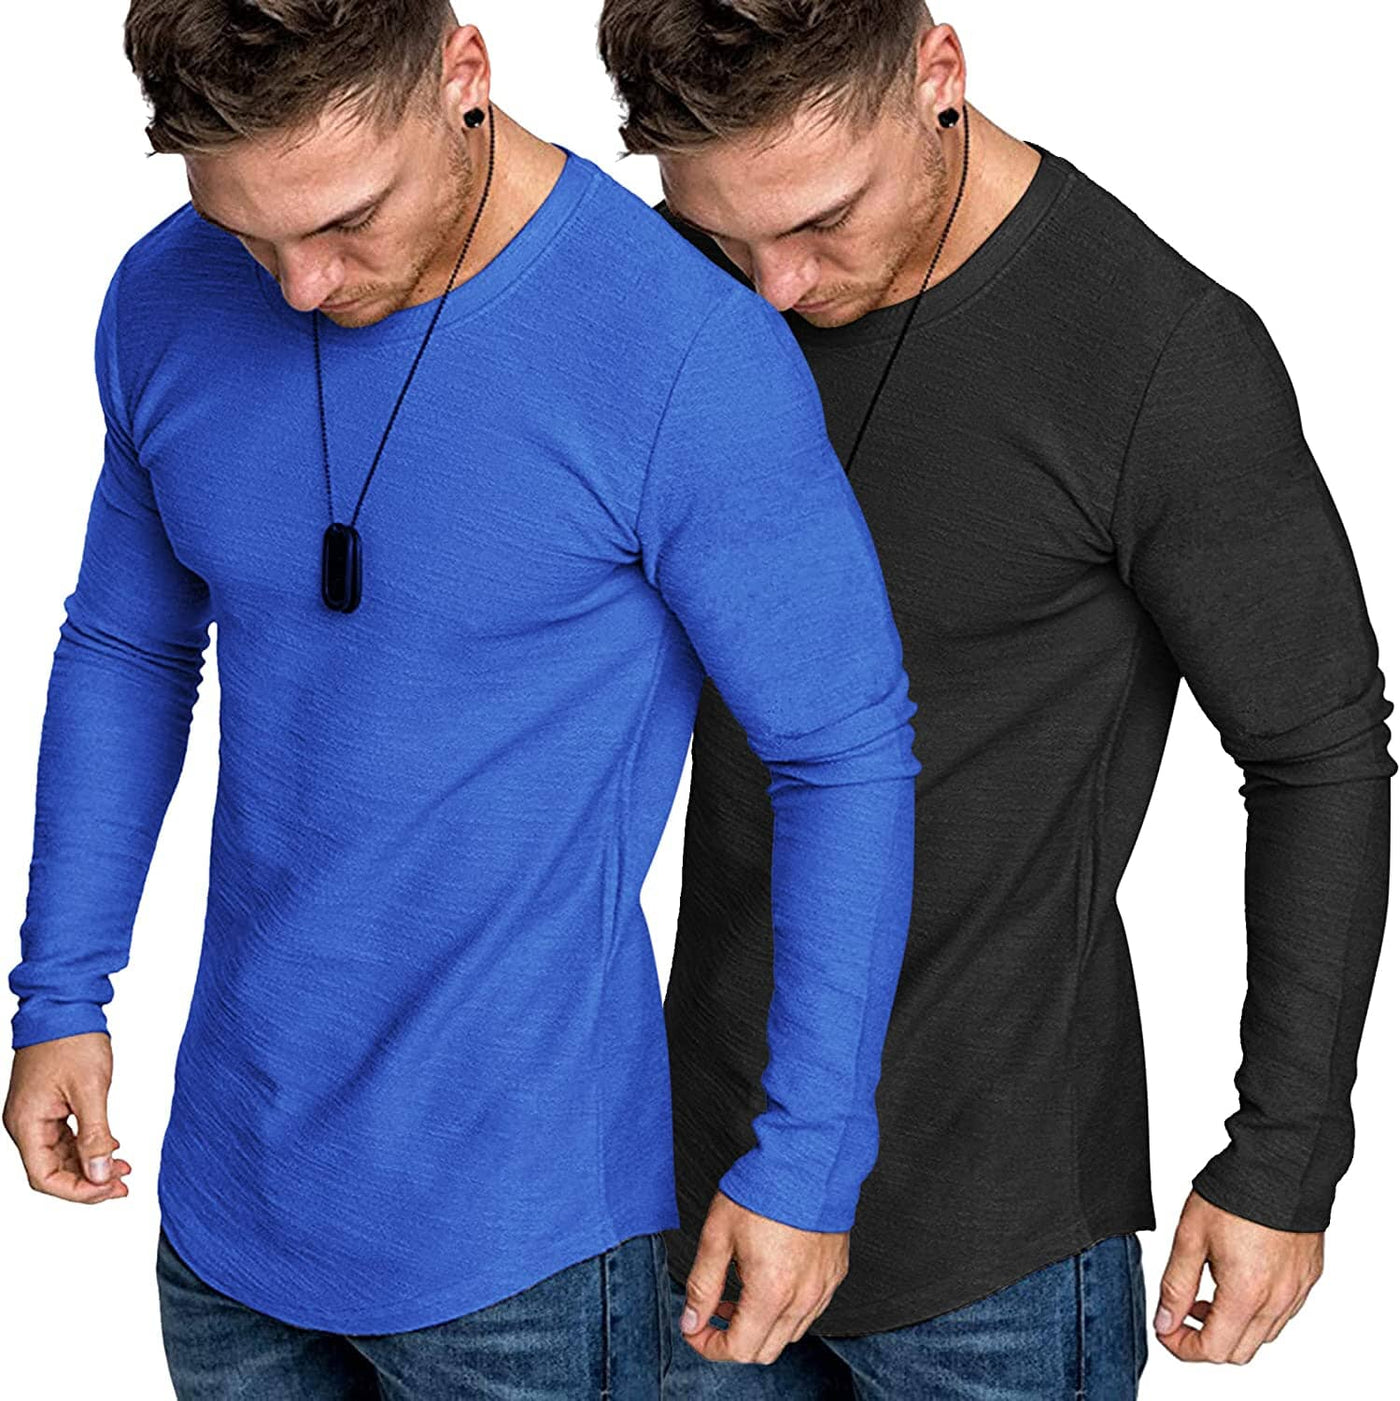 2-Pack Muscle Fitted Workout T-Shirt (US Only) T-Shirt COOFANDY Store Black/Blue S 